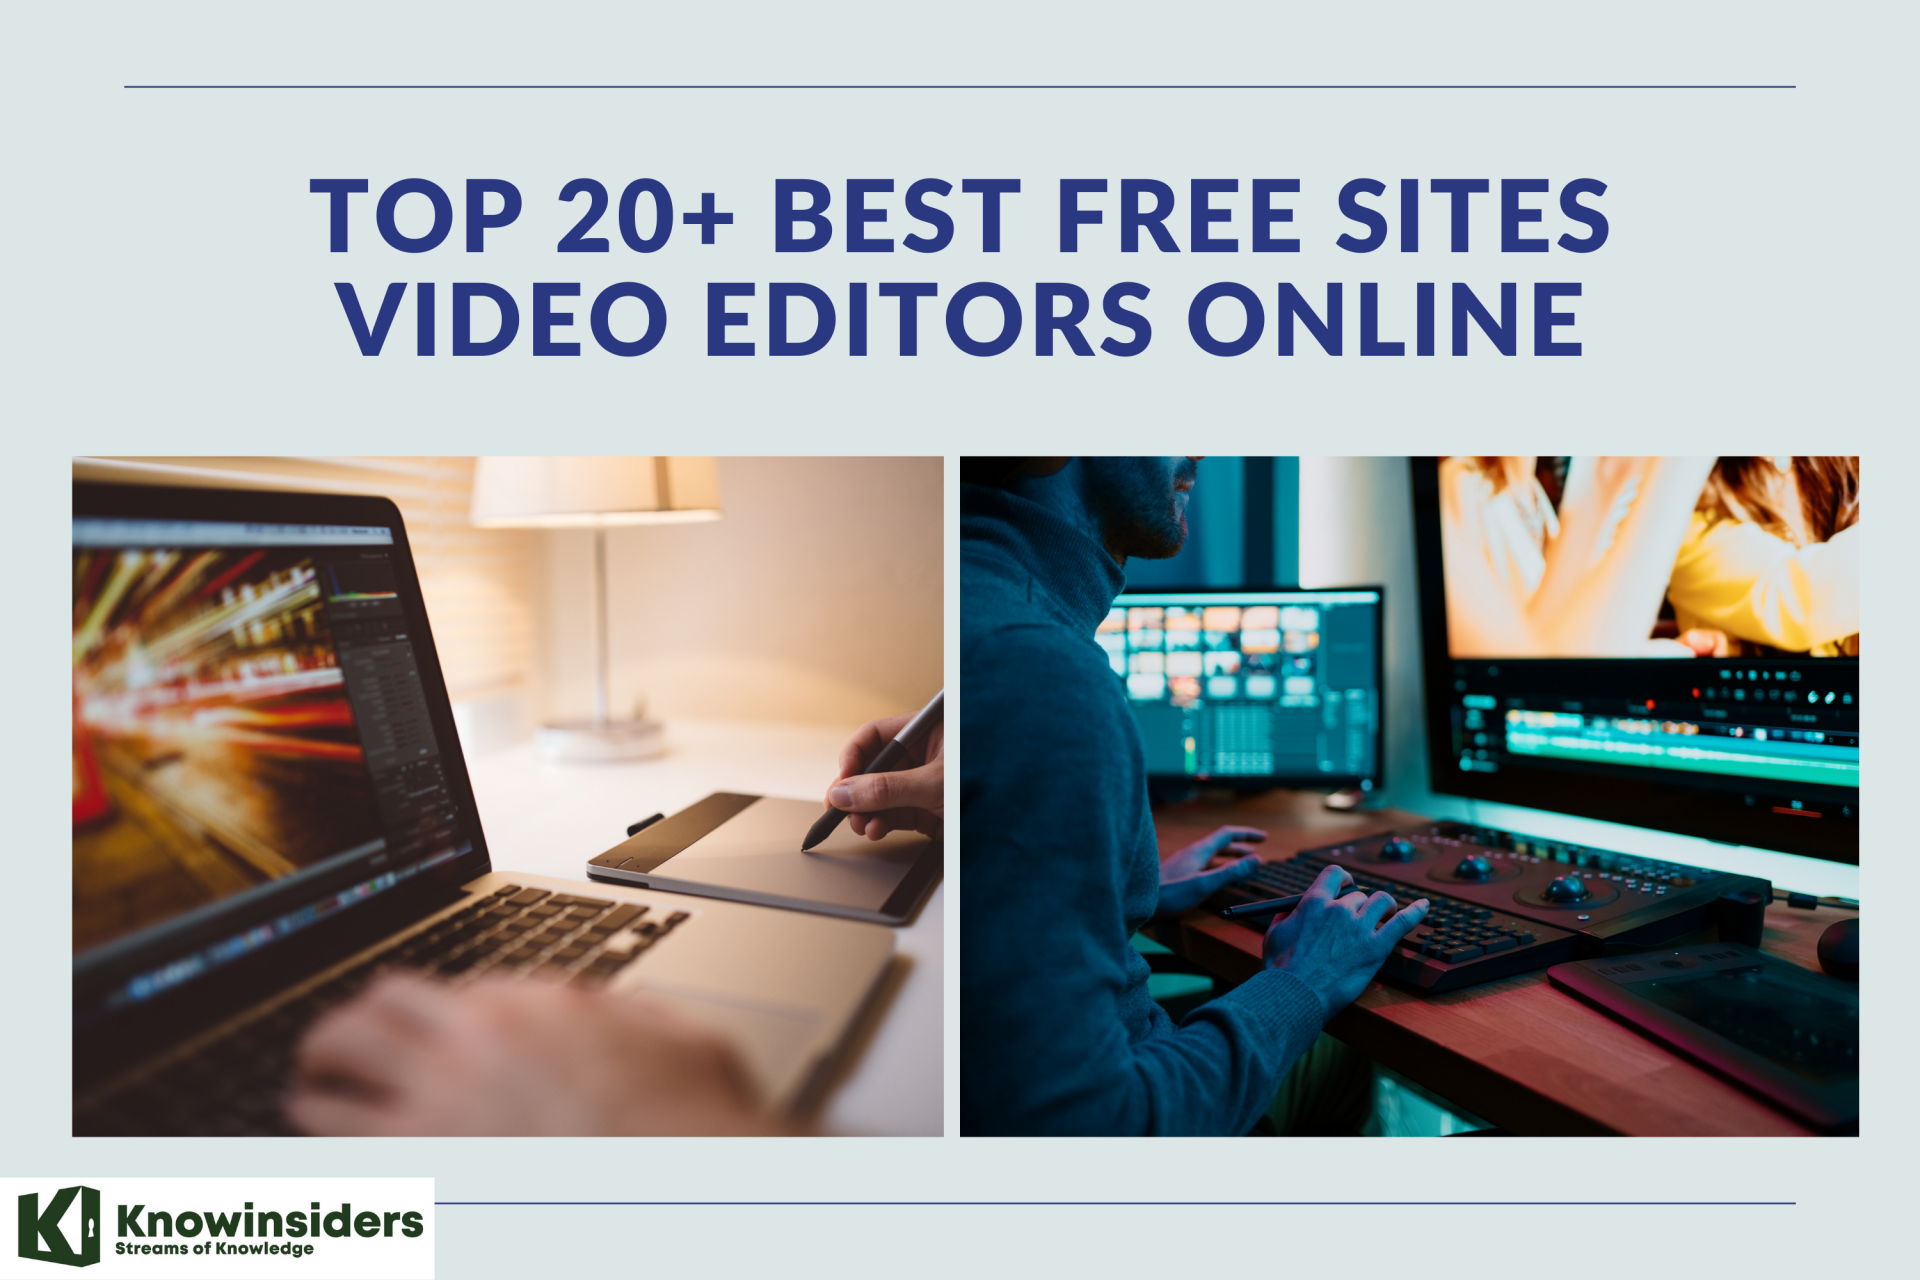 Top 20+ Best Free Sites for Video Editors Online